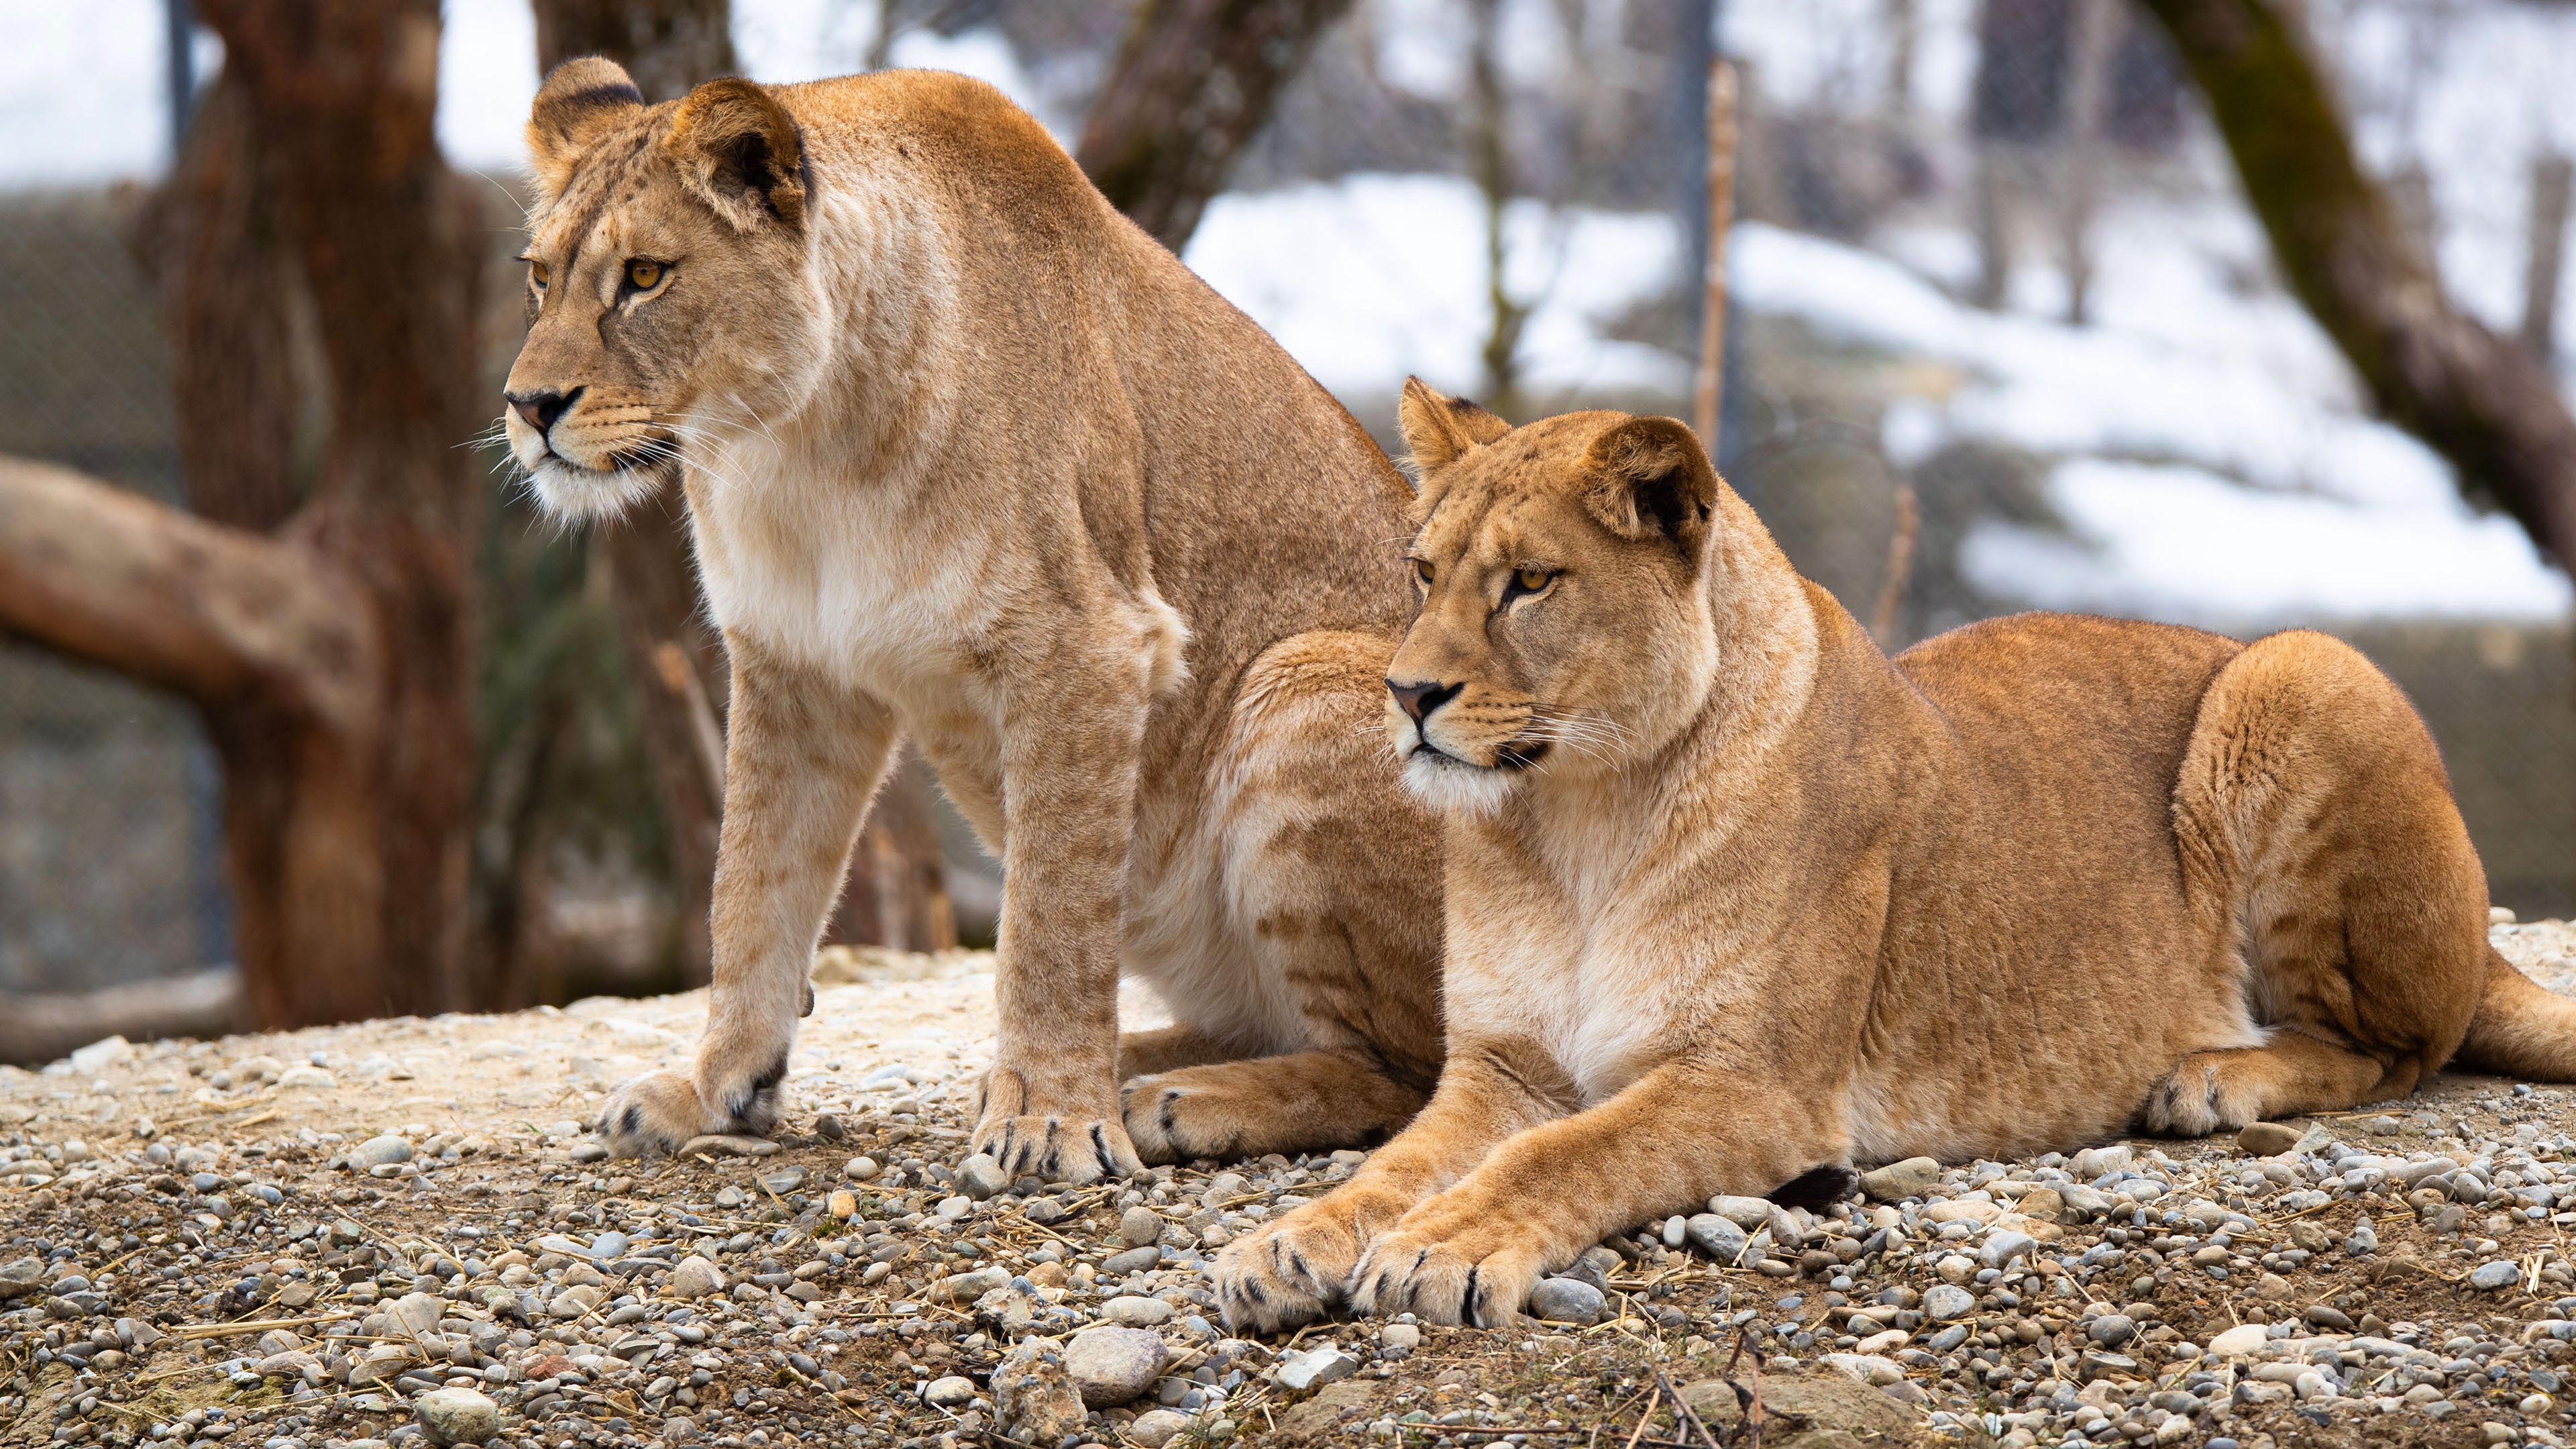 The two lionesses look intently into the distance